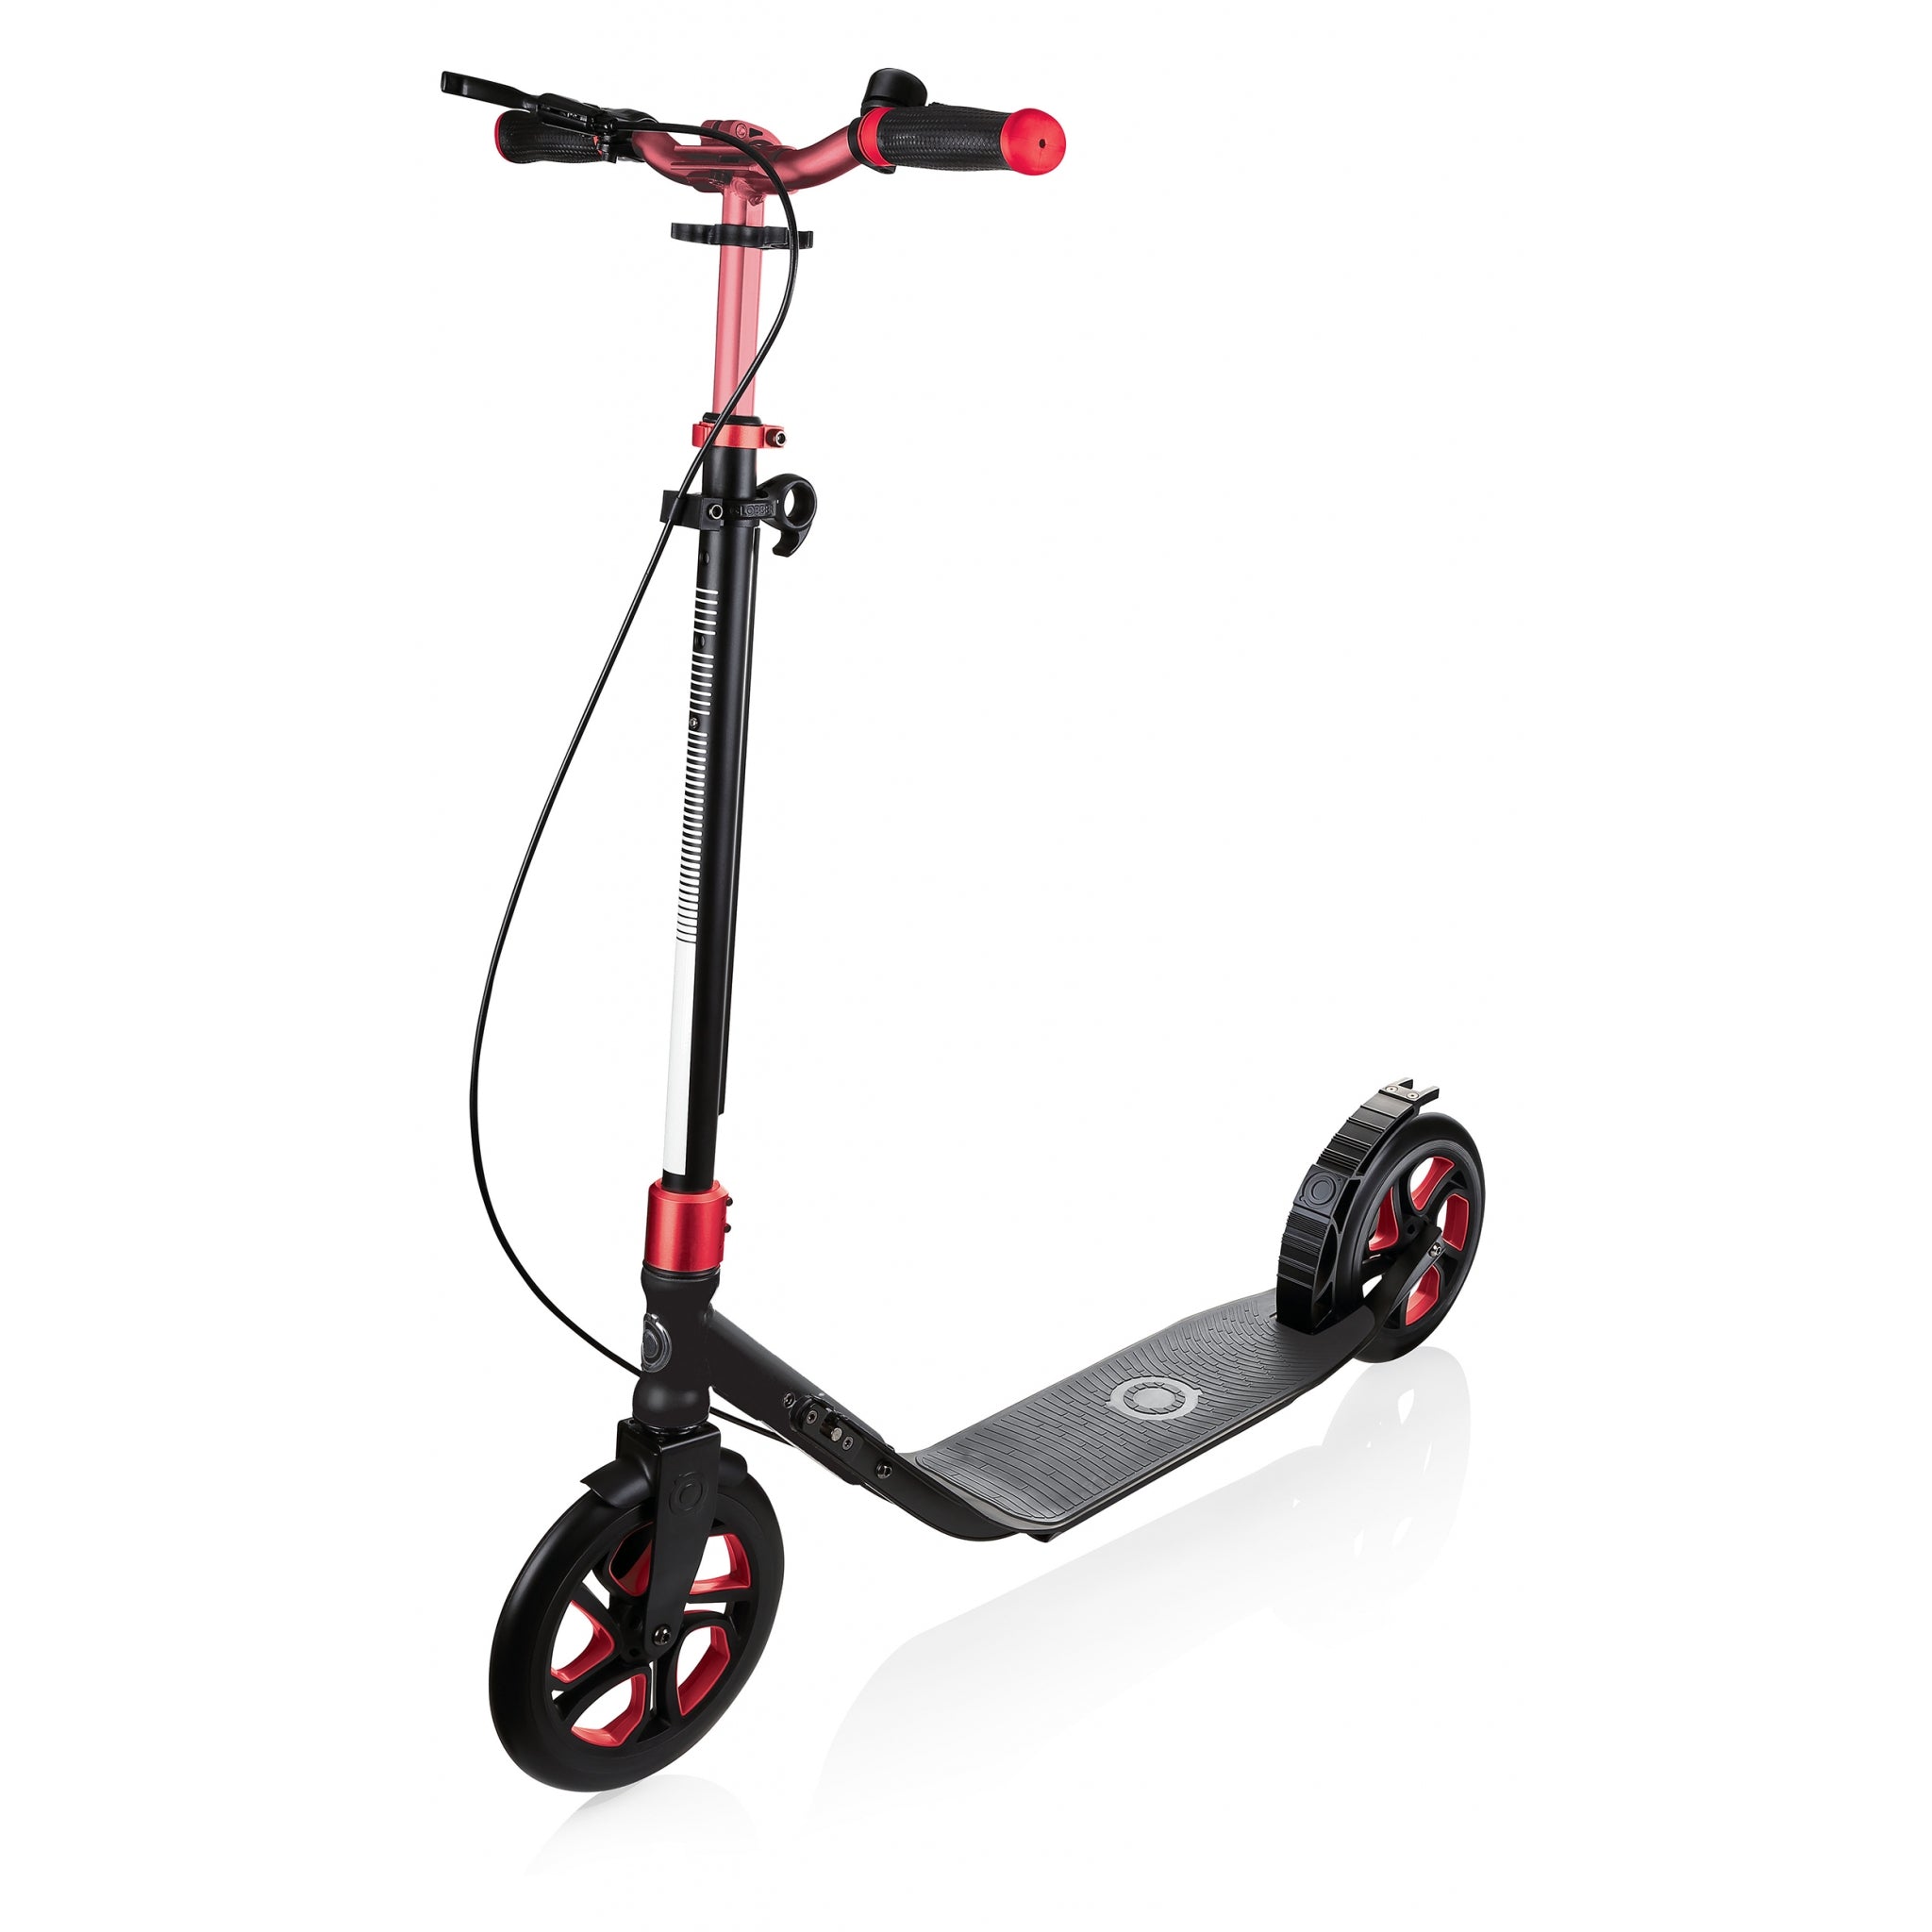 Scooter One NL 230 Ultimate Big Wheel in Red | Live Laugh